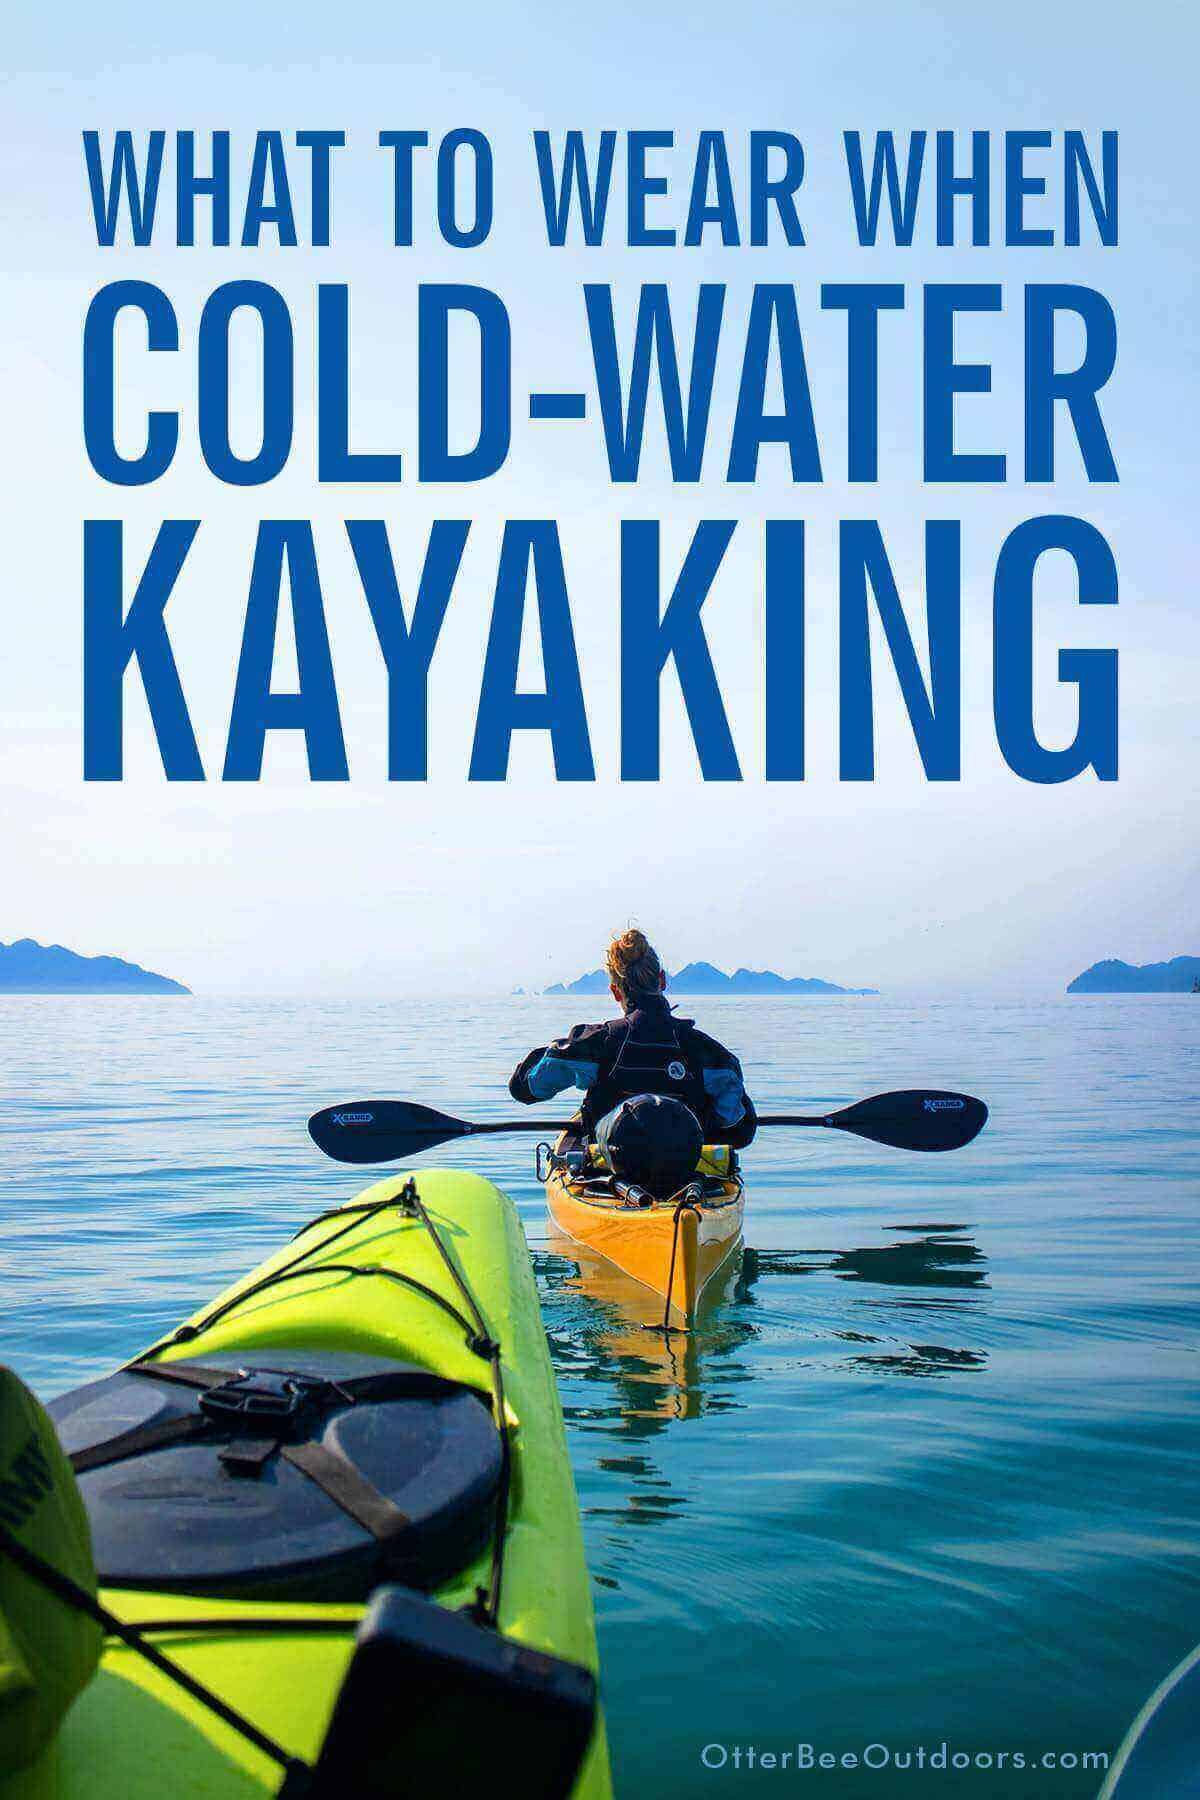 Cold-water kayaking introduces the risk of hypothermia. Wetsuits, drysuits, dry tops, paddling jackets, semi-dry tops, dry pants, base layers, rash guards, headwear, gloves, and footwear are used to protect a kayaker from cold water temperatures and maintain a healthy body temperature. The graphic asks the question... What Do You Wear When Kayaking In Cold Water?